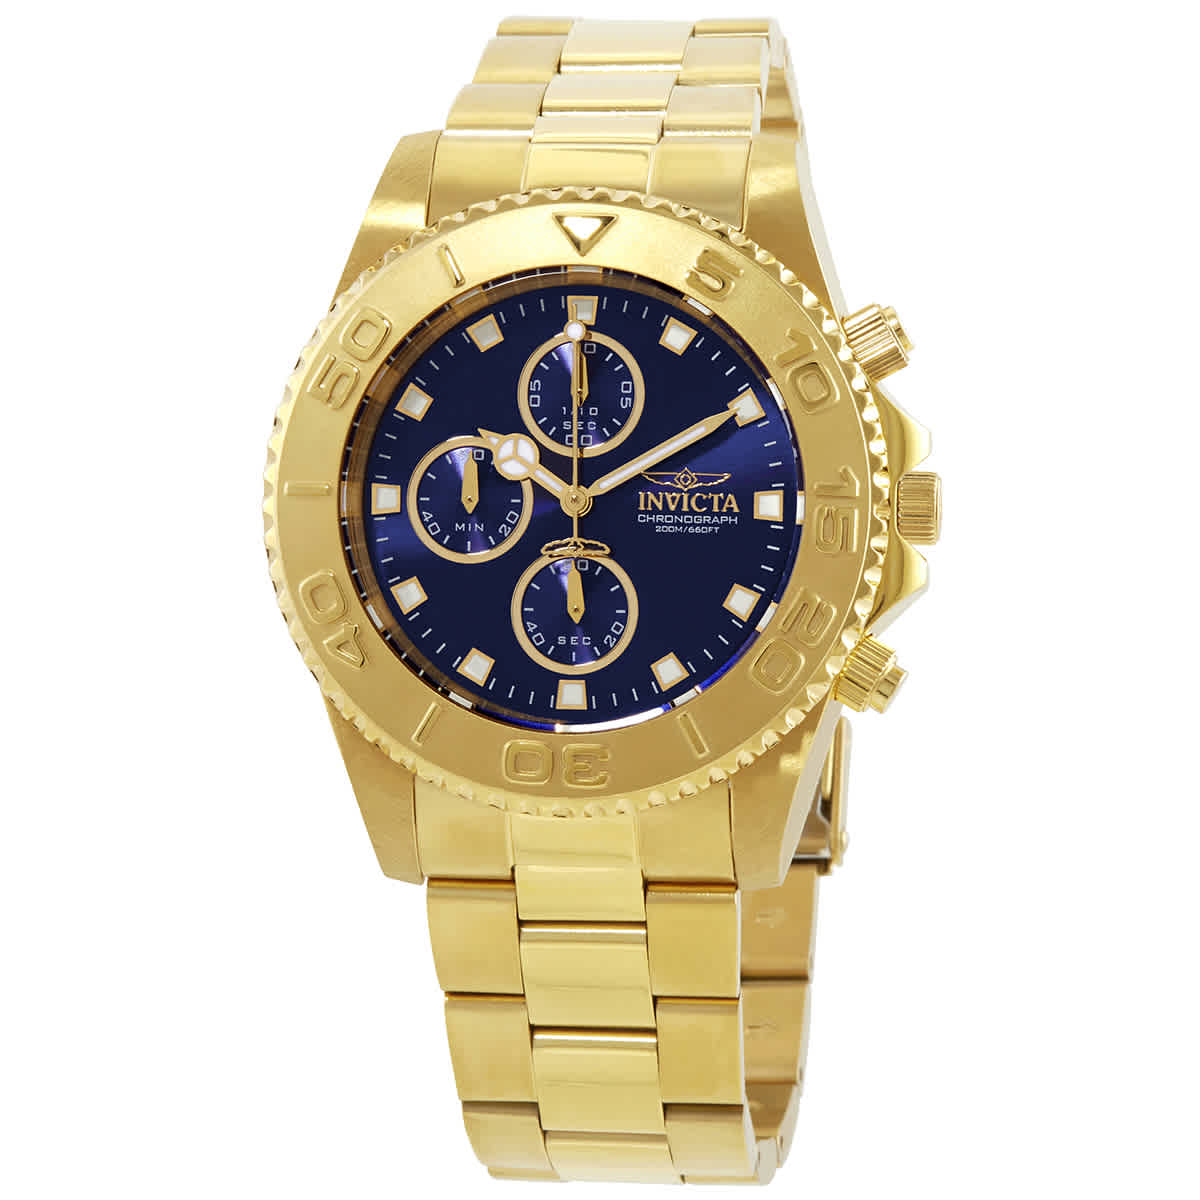 Invicta Pro Diver Chronograph Blue Dial Mens Watch 28682 In Blue / Gold Tone